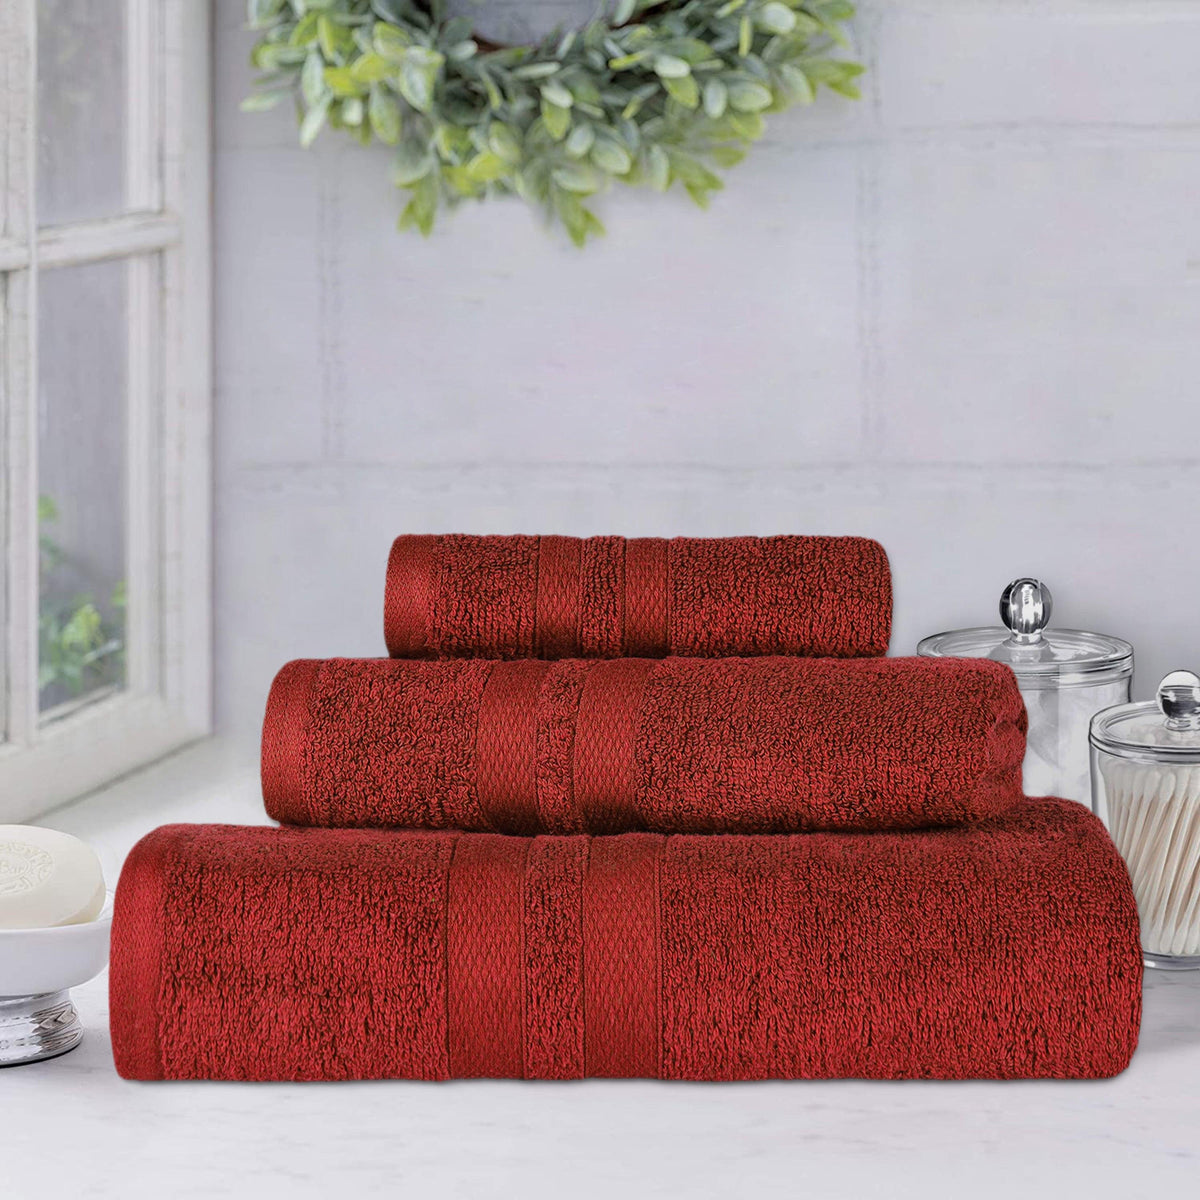 Superior Ultra Soft Cotton Absorbent Solid Assorted 3-Piece Towel Set - Maroon